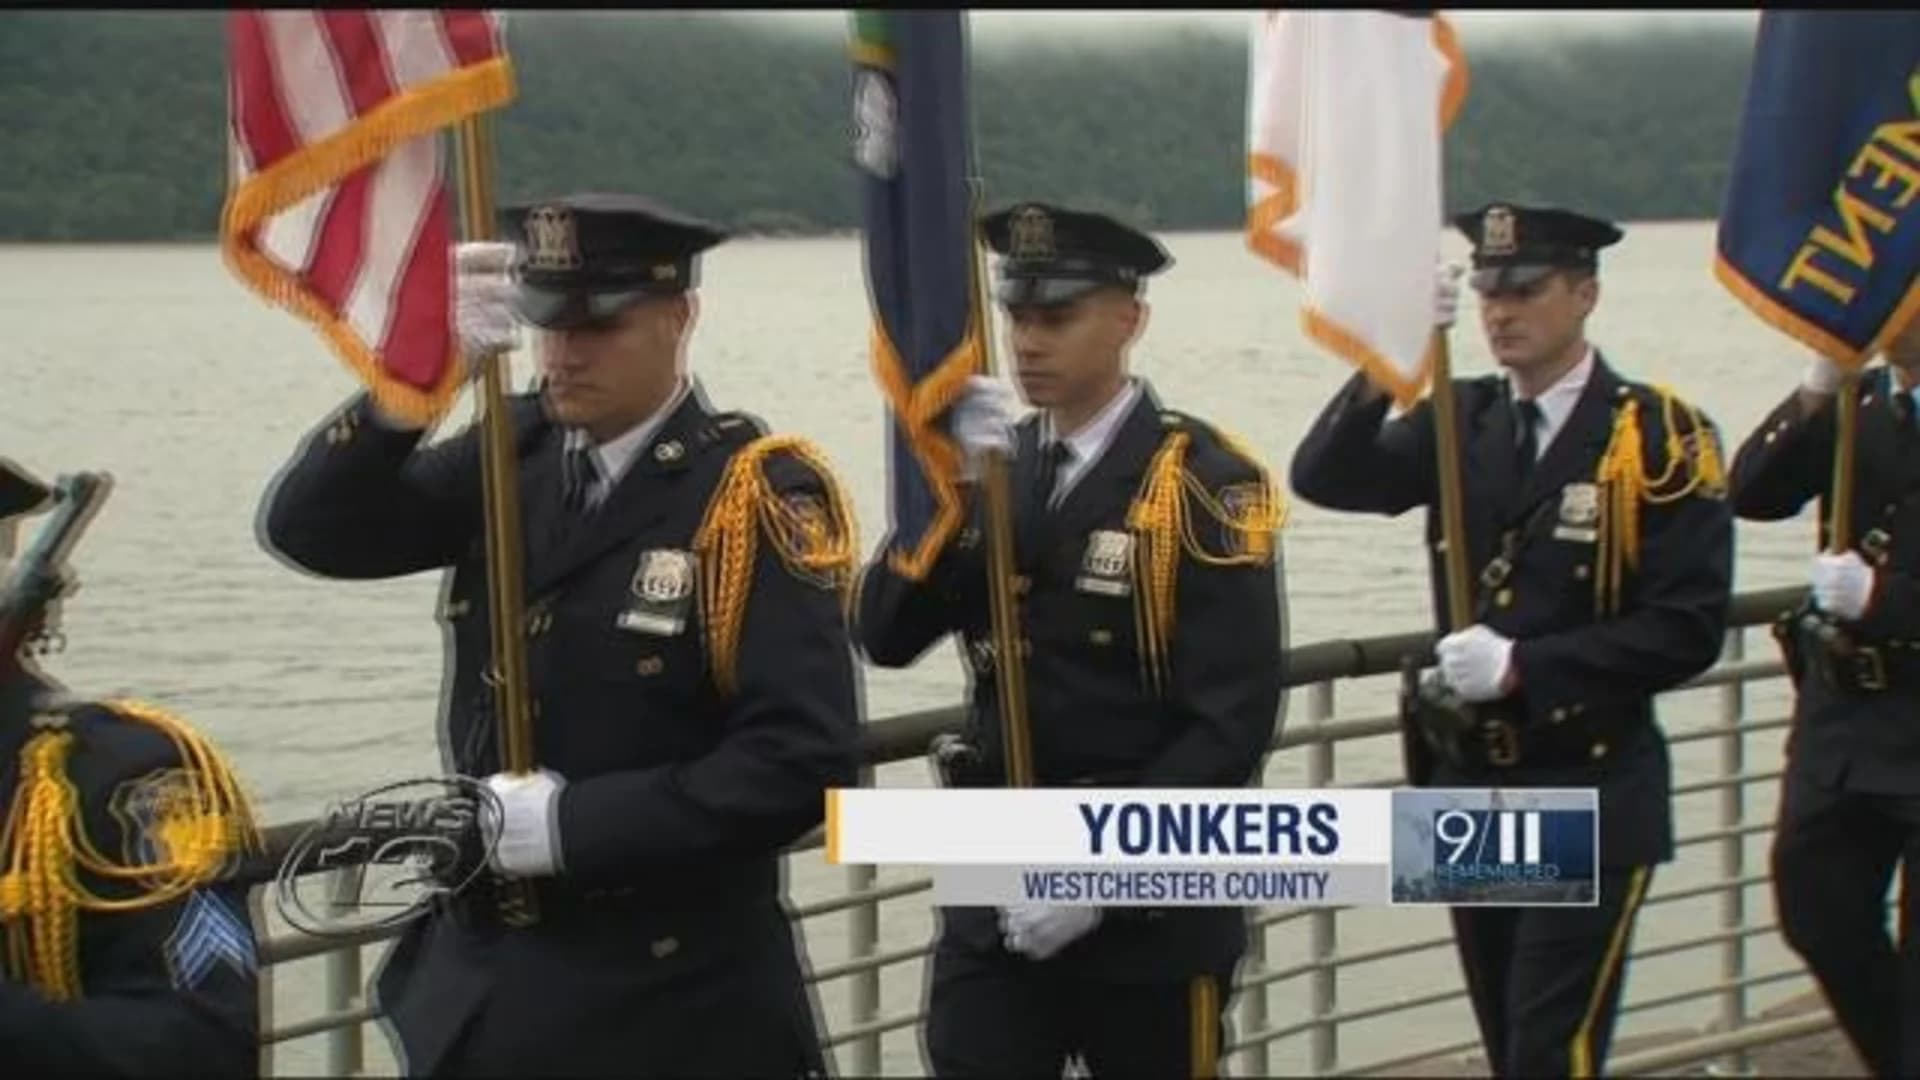 Yonkers pays tribute to 9/11 victims, military, first responders